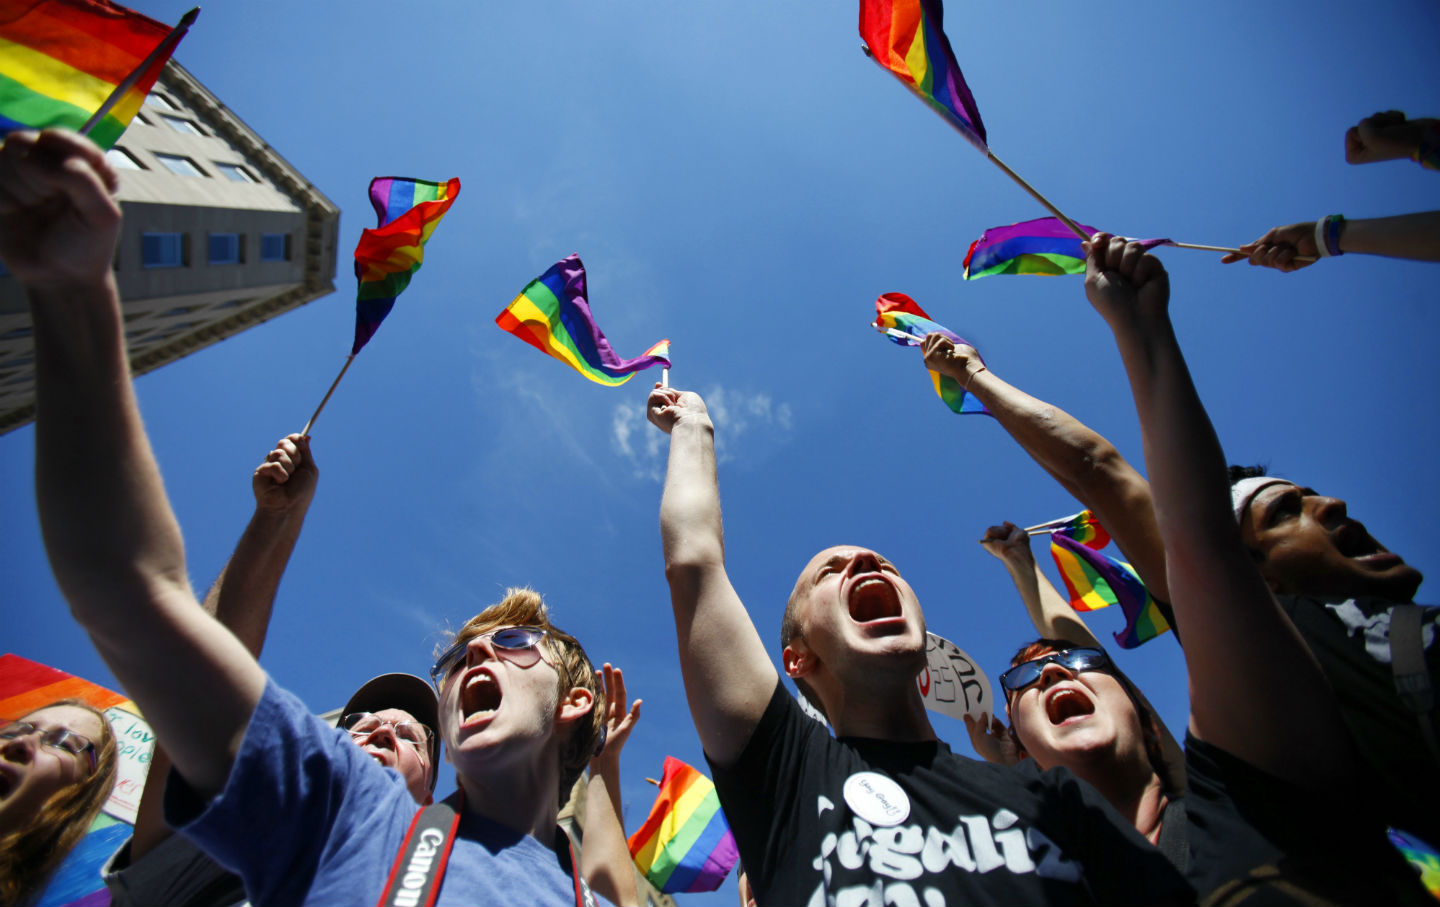 SCOTUS Will Likely Legalize Same-Sex Marriage—but the Fight Over Marriage Is Not Done Yet